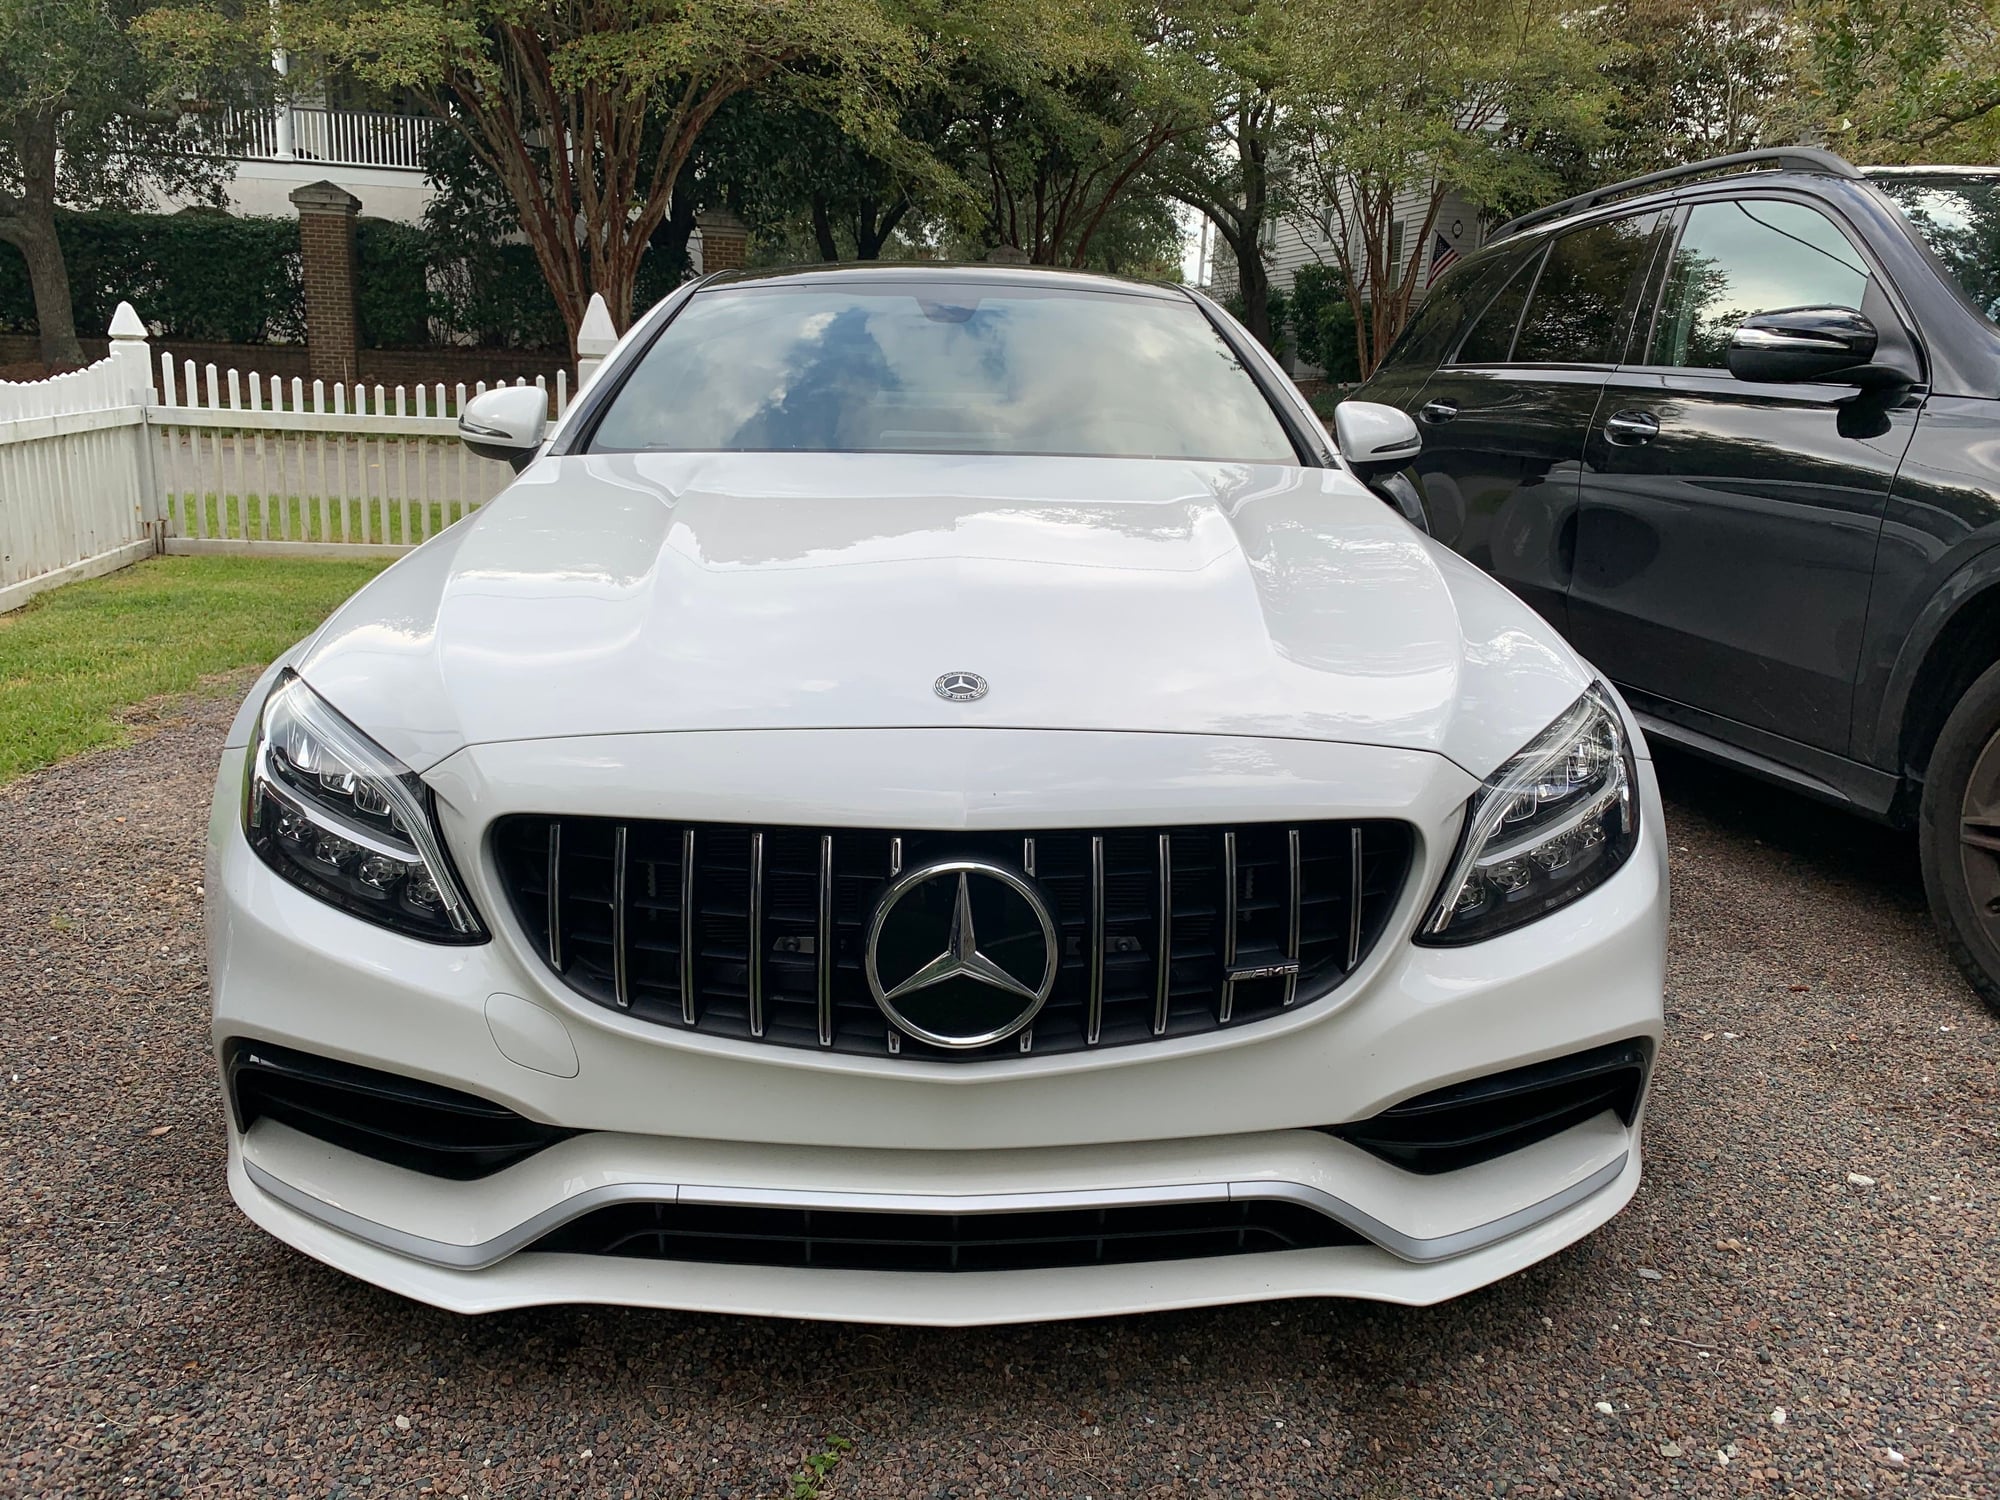 2020 Mercedes-Benz C63 AMG - 2020 C63 Coupe 7k miles. Super clean. - Used - VIN WDDWJ8GB3LF94615 - 6,900 Miles - 8 cyl - 2WD - Automatic - White - Charleston, SC 29401, United States